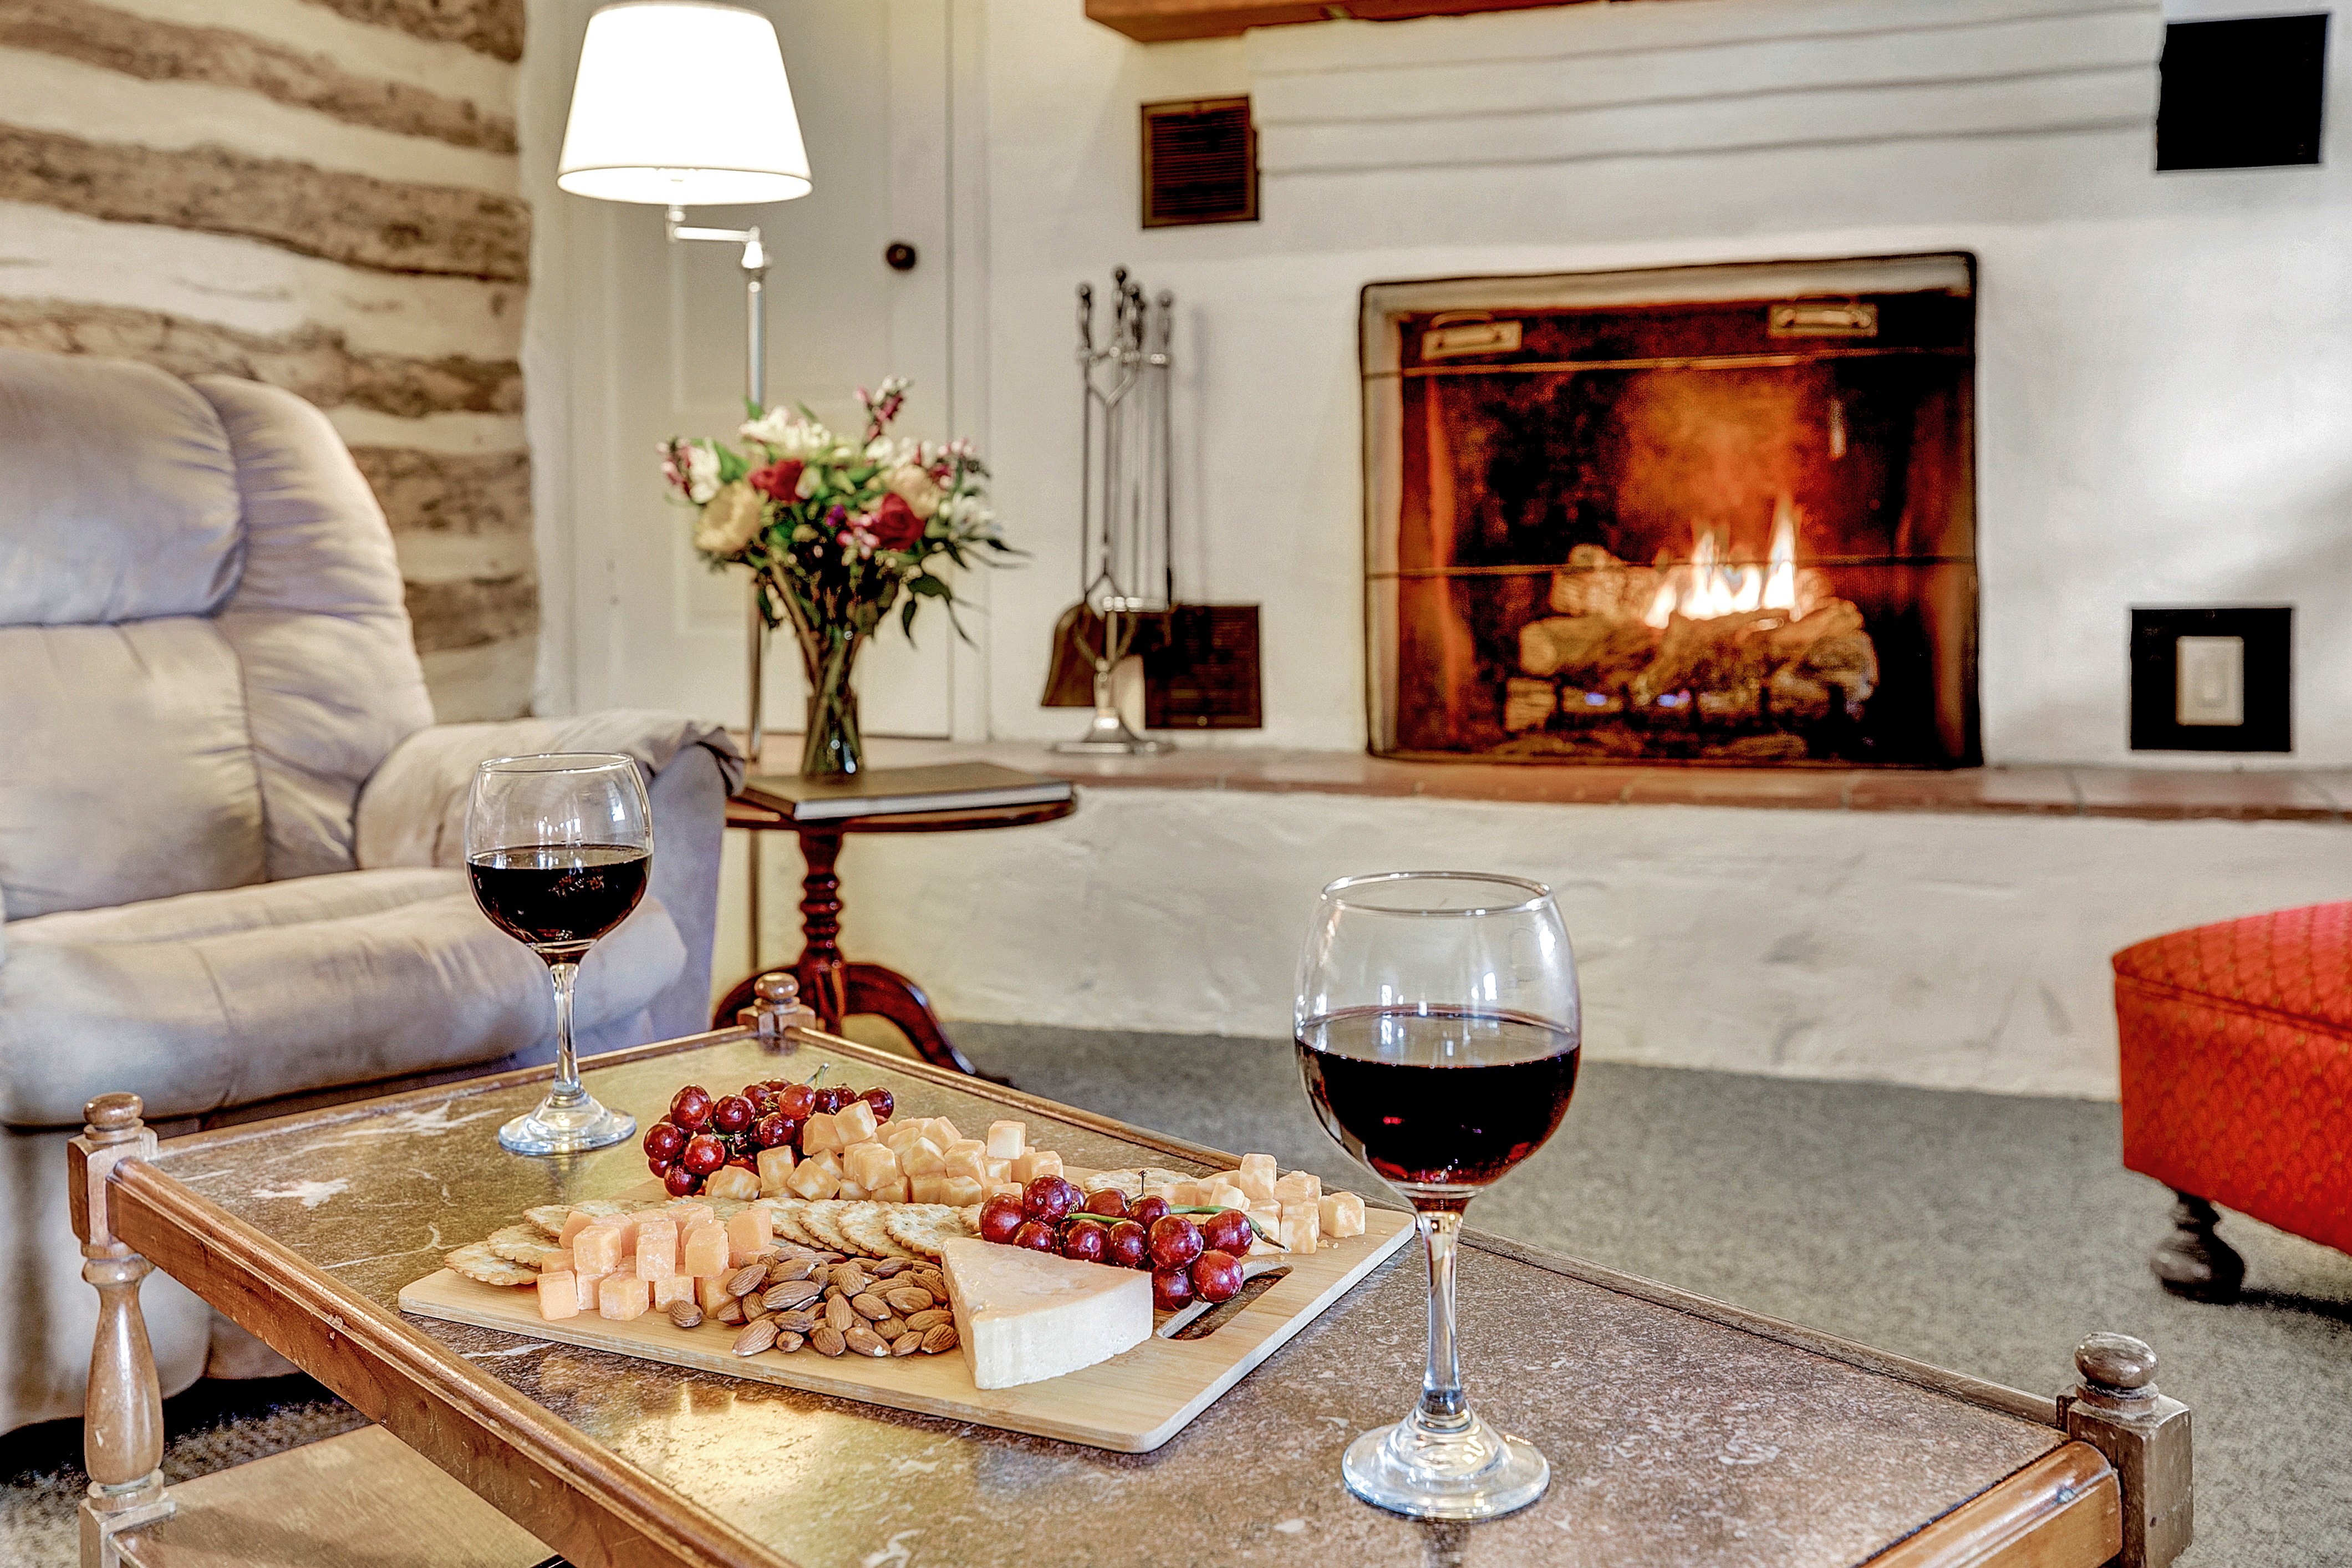 Enjoy a romantic moments by the fire!